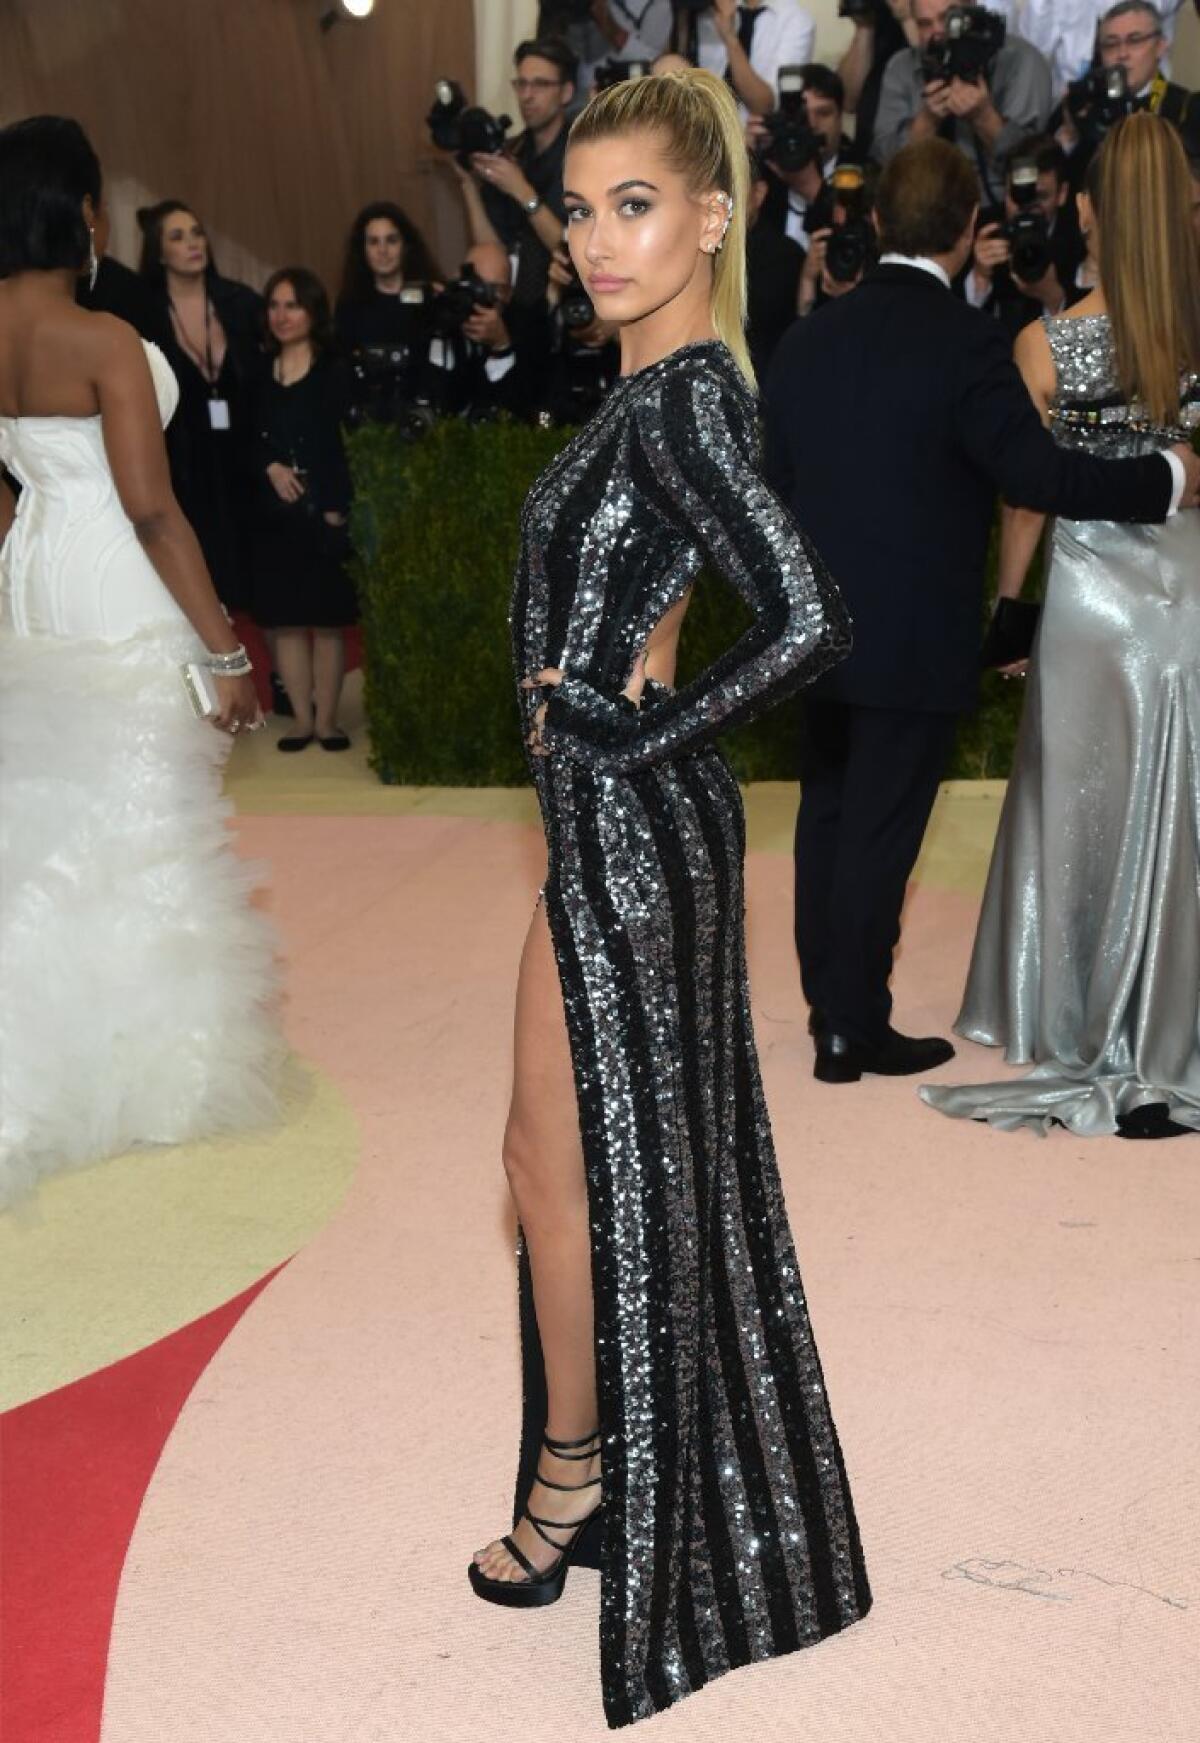 Hailey Baldwin arrives at the Met Gala on Monday in New York.